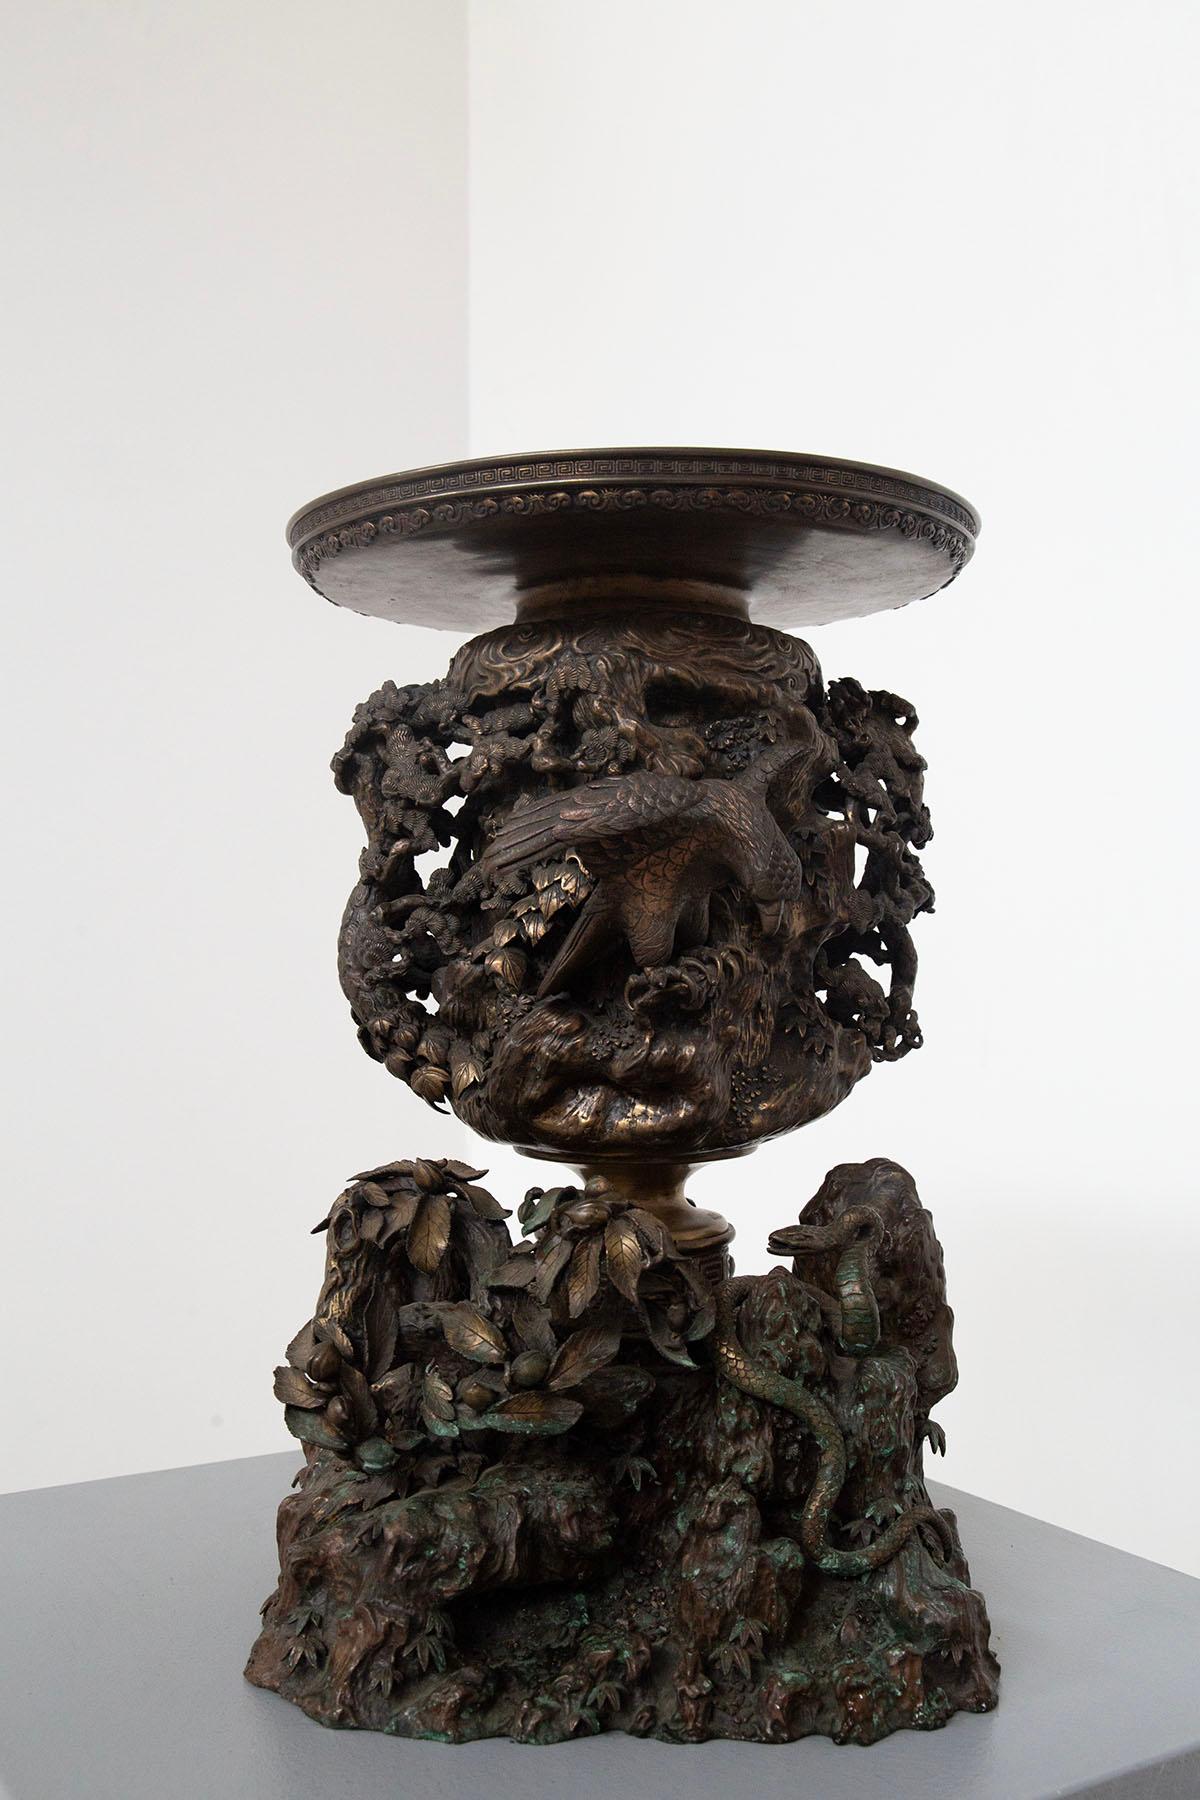 Detailed information: Exceptional finely chiselled Japanese patinated bronze censer from the Meiji period, with high relief design. The shaft, with a rotating decoration of snakes and branches, is supported by a base decorated with foliage and